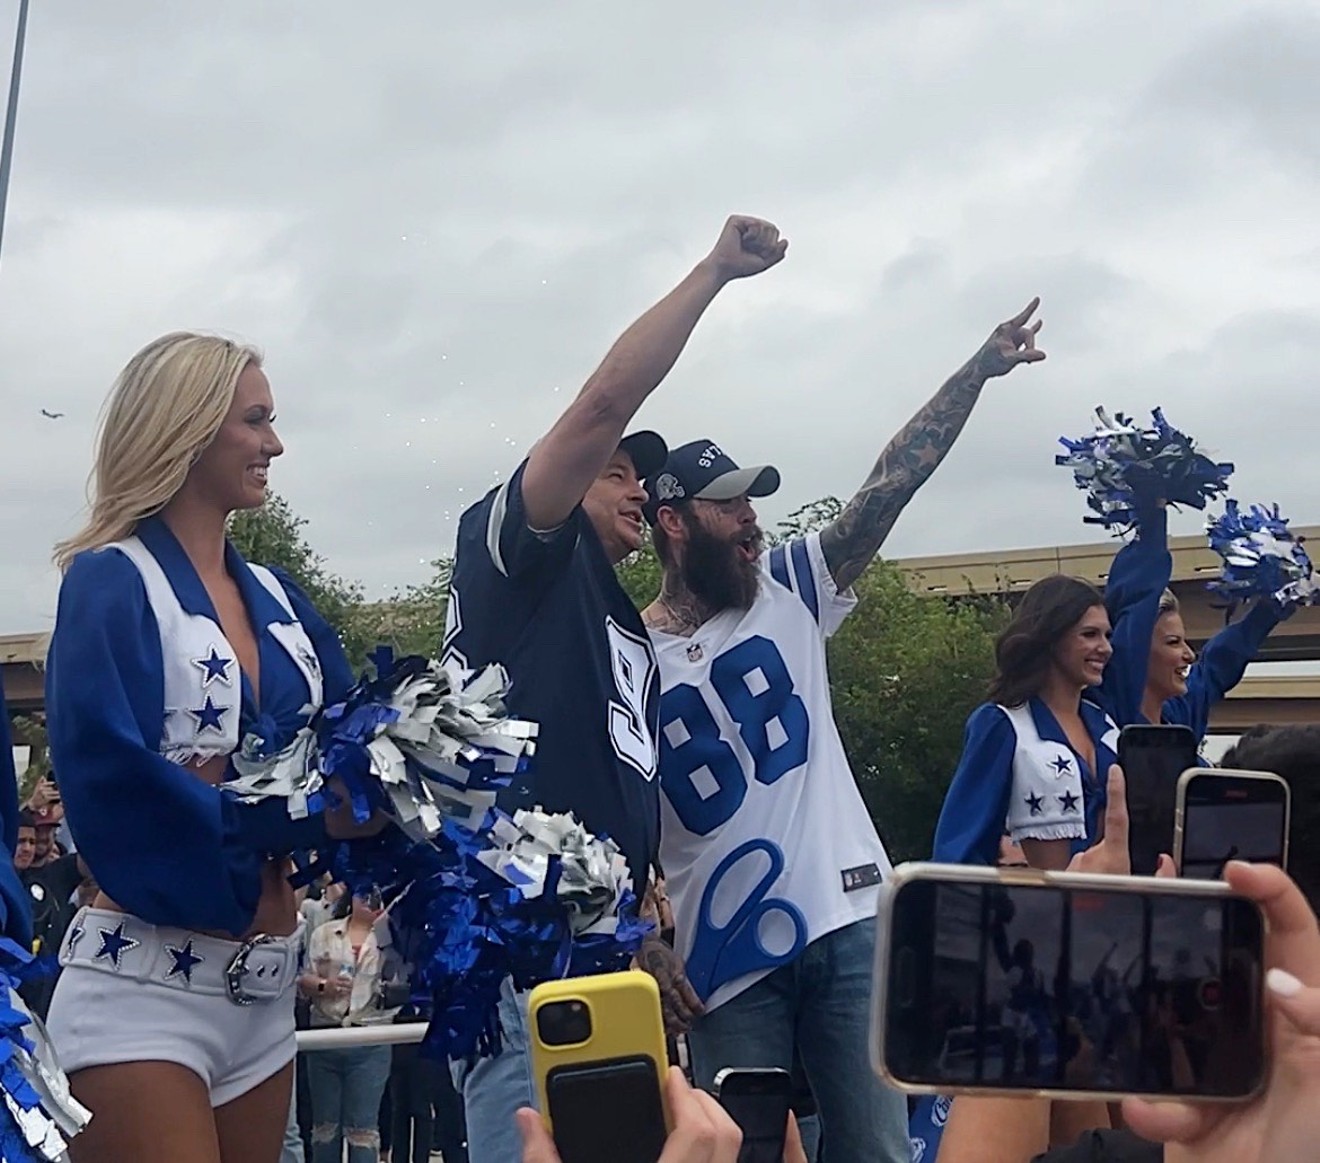 Raising Cane's CEO Todd Graves and Post Malone were joined by fans and Dallas Cowboys cheerleaders for the opening of a Cowboys-themed Raising Cane's restaurant on Northwest Highway.